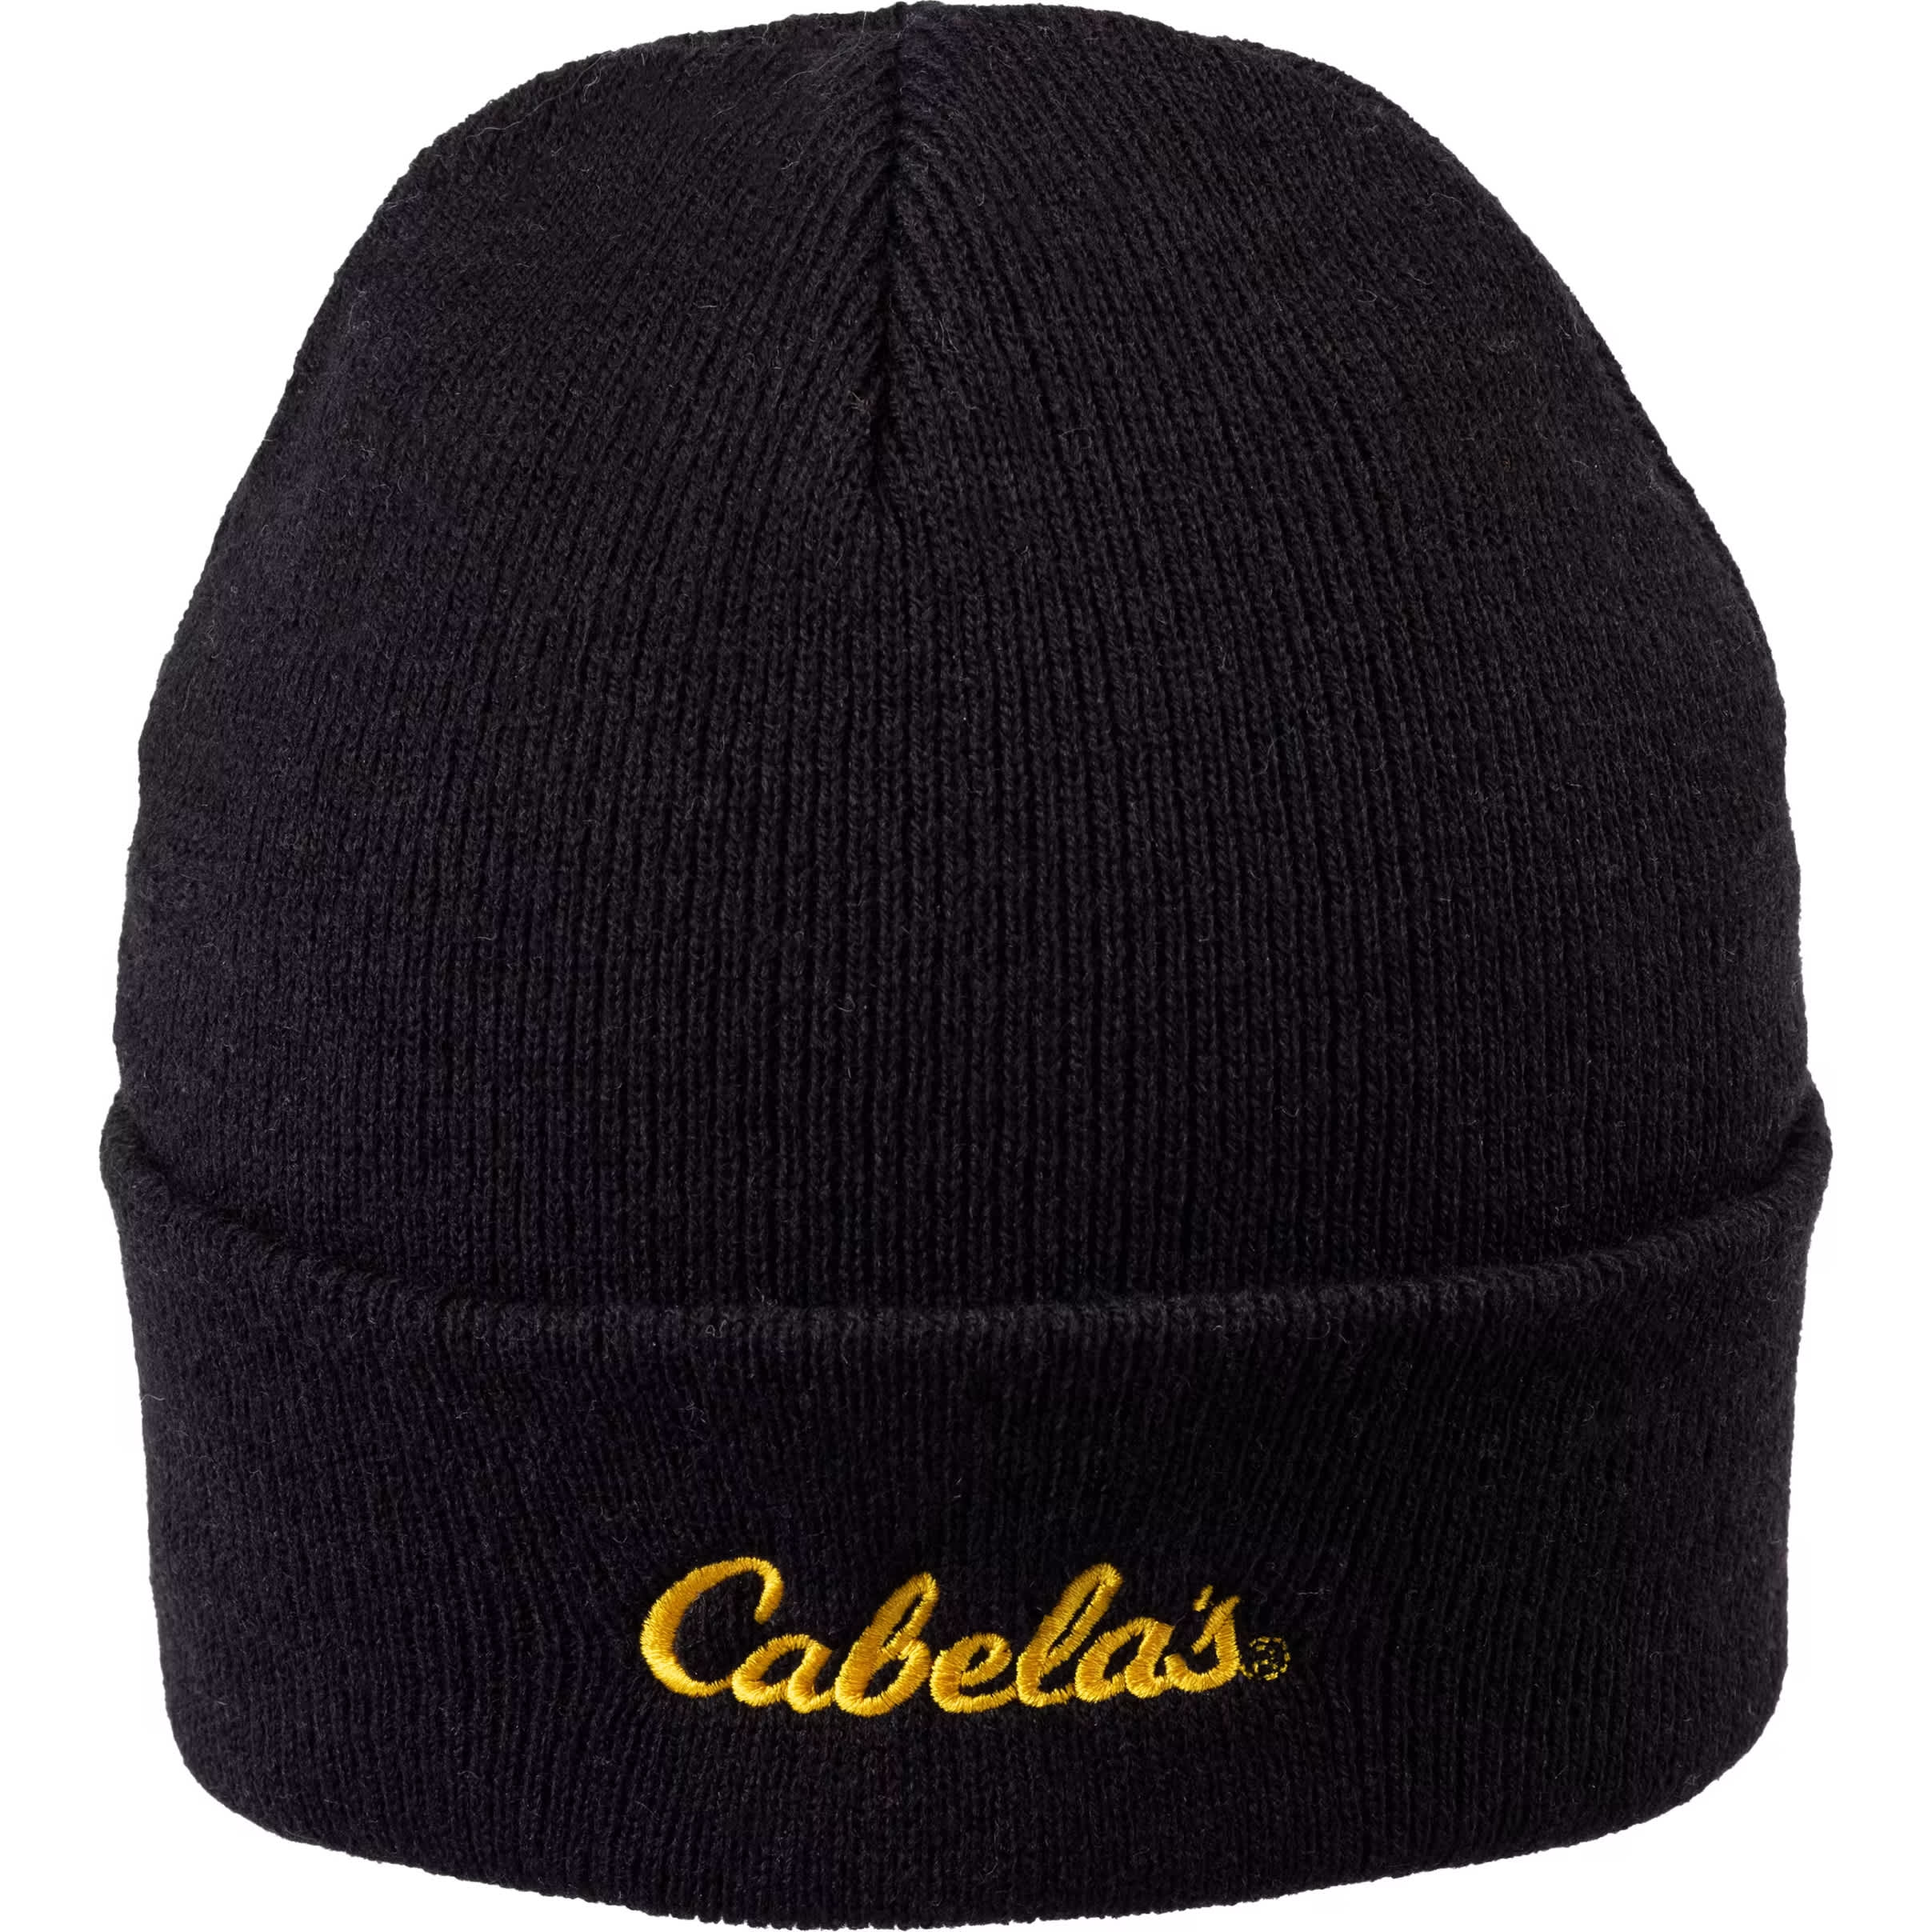 Cabela’s Youth Knit Embroidered Beanie